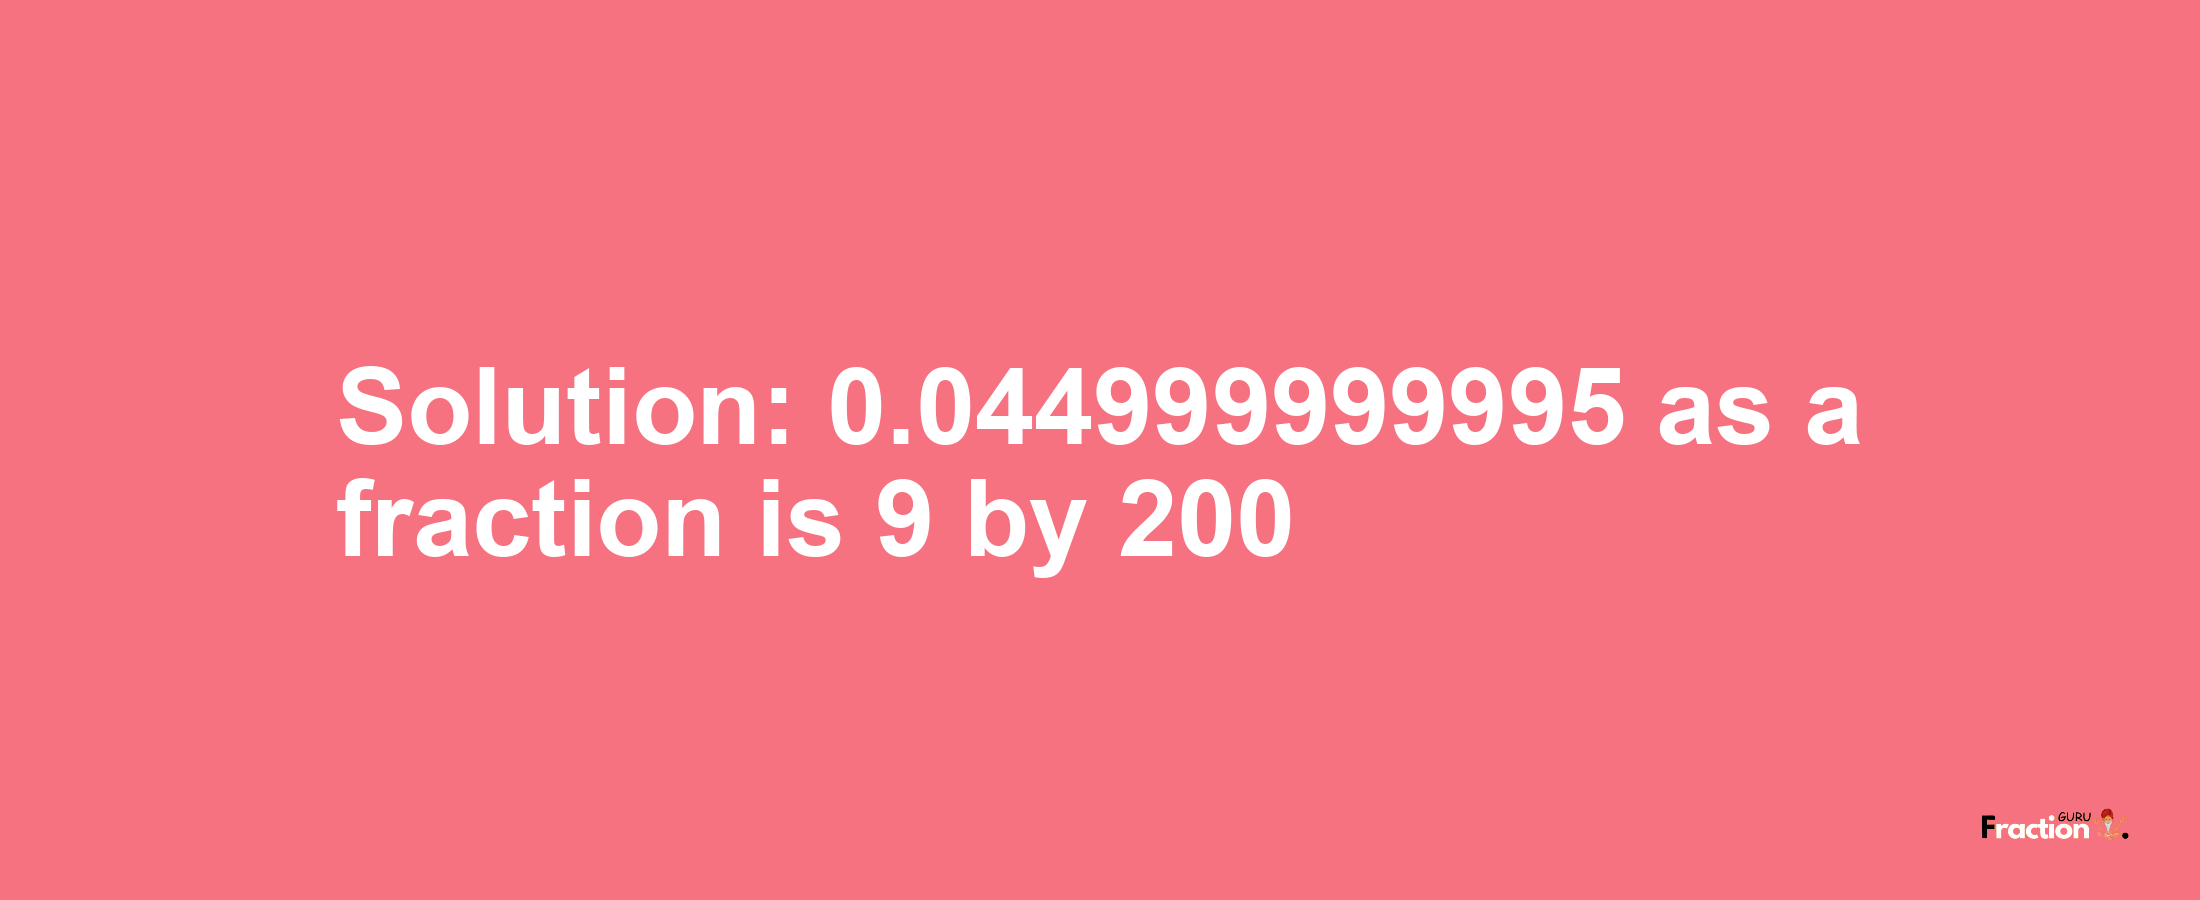 Solution:0.044999999995 as a fraction is 9/200